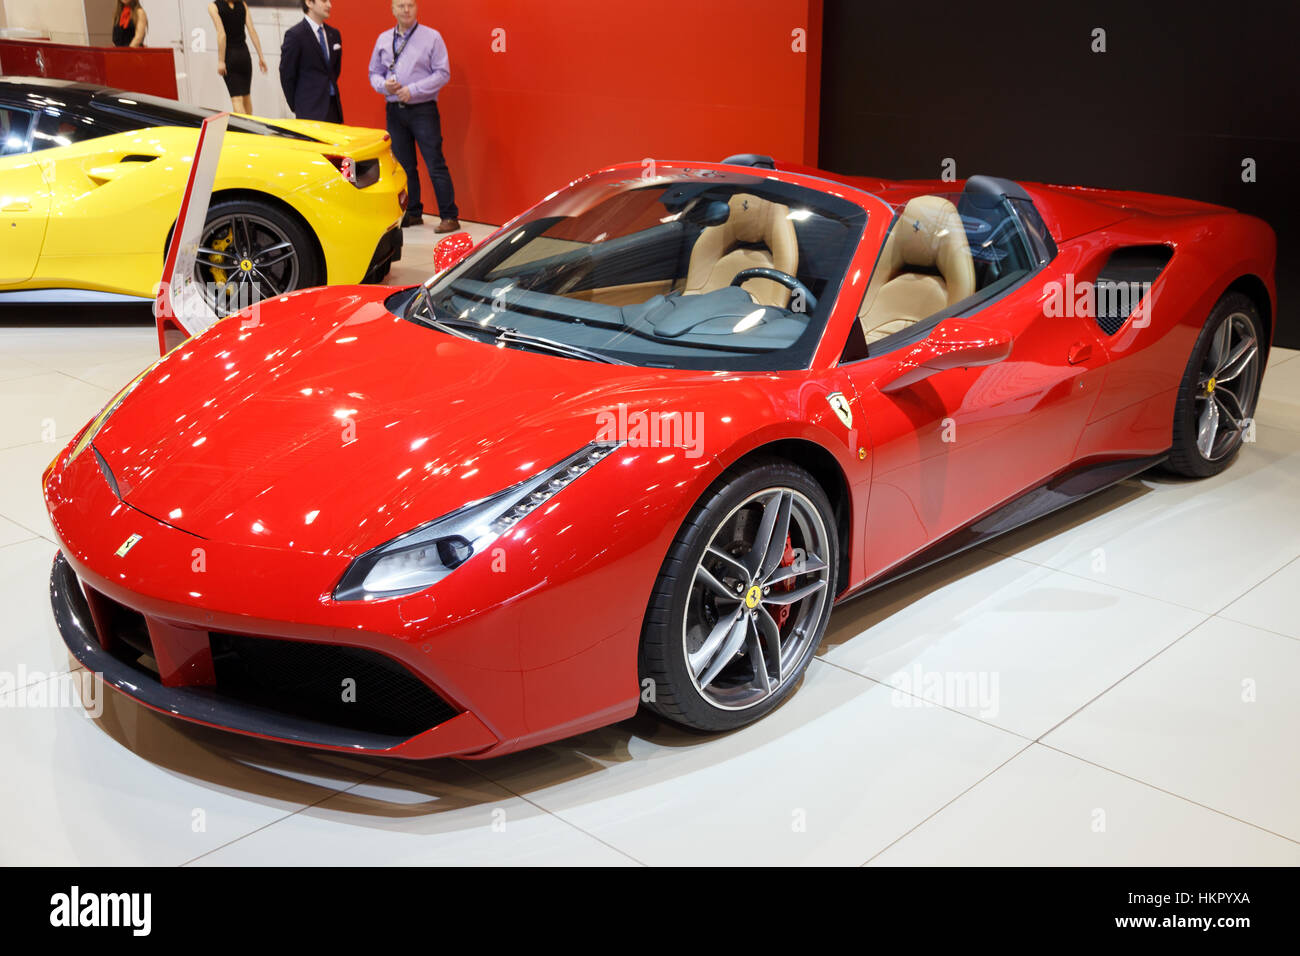 Red ferrari 488 spider hi-res stock photography and - Alamy